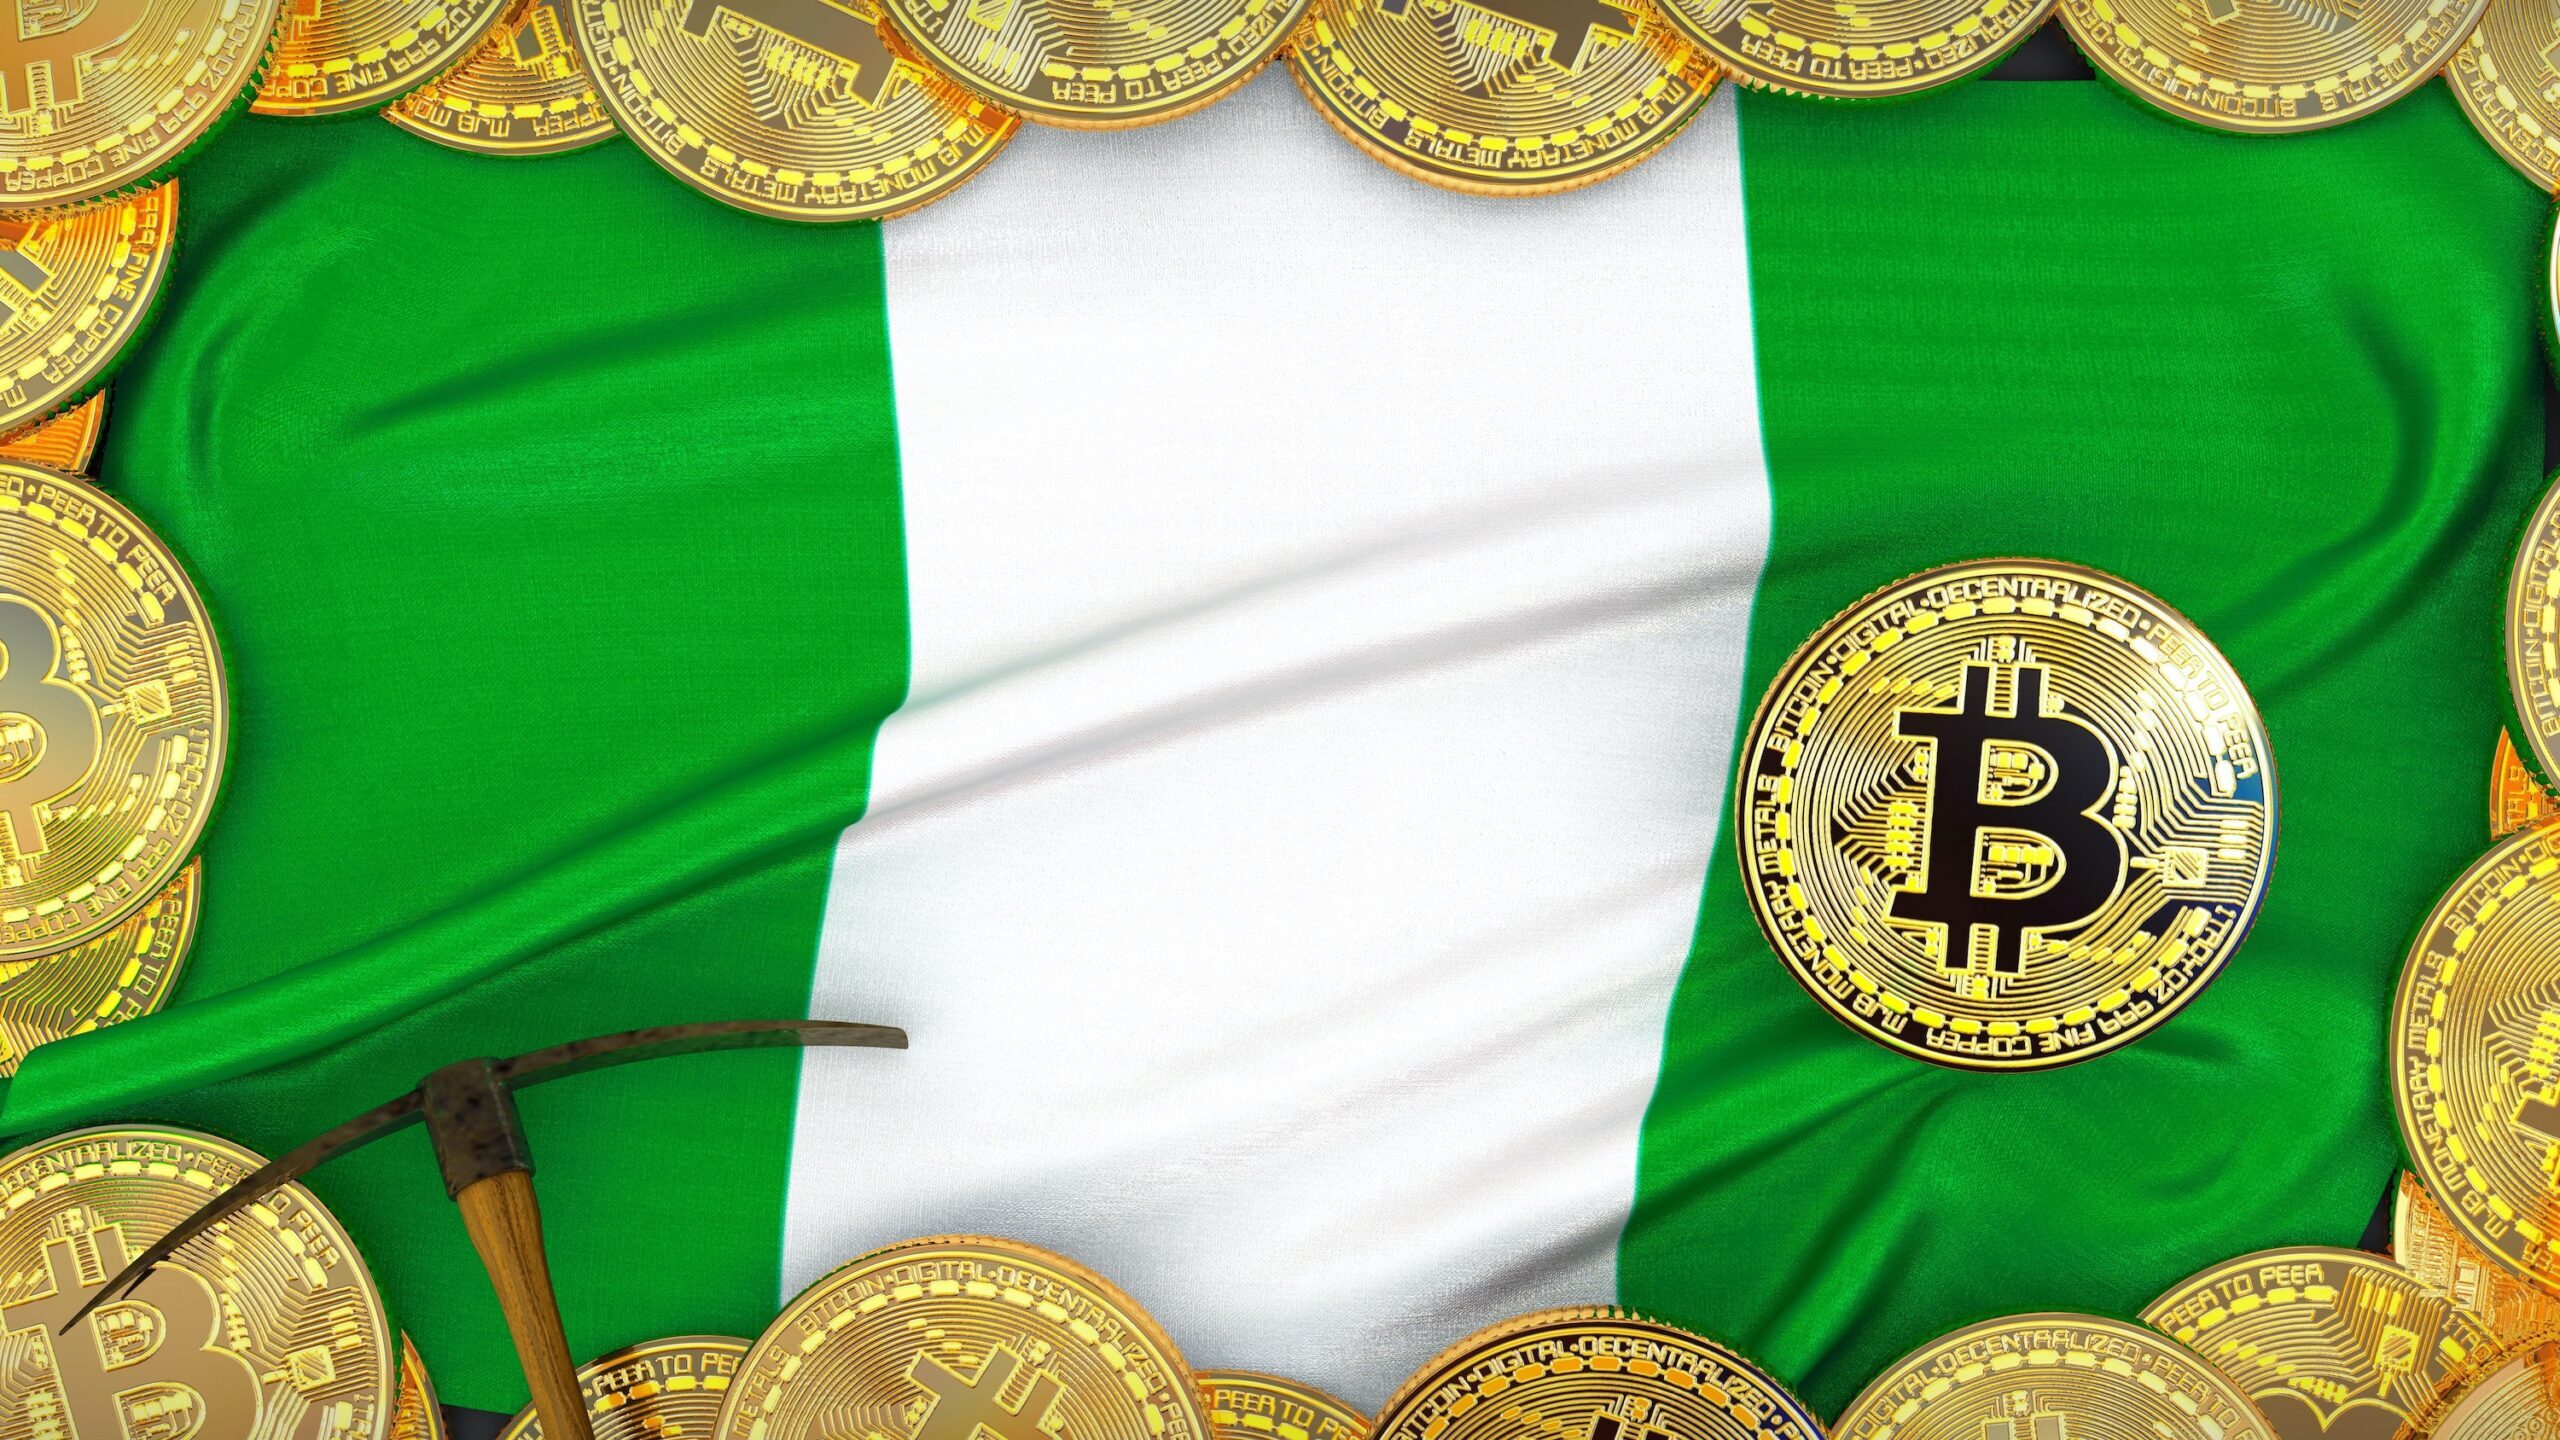 Nigeria seeks to Legalise Bitcoin and Cryptocurrency Use